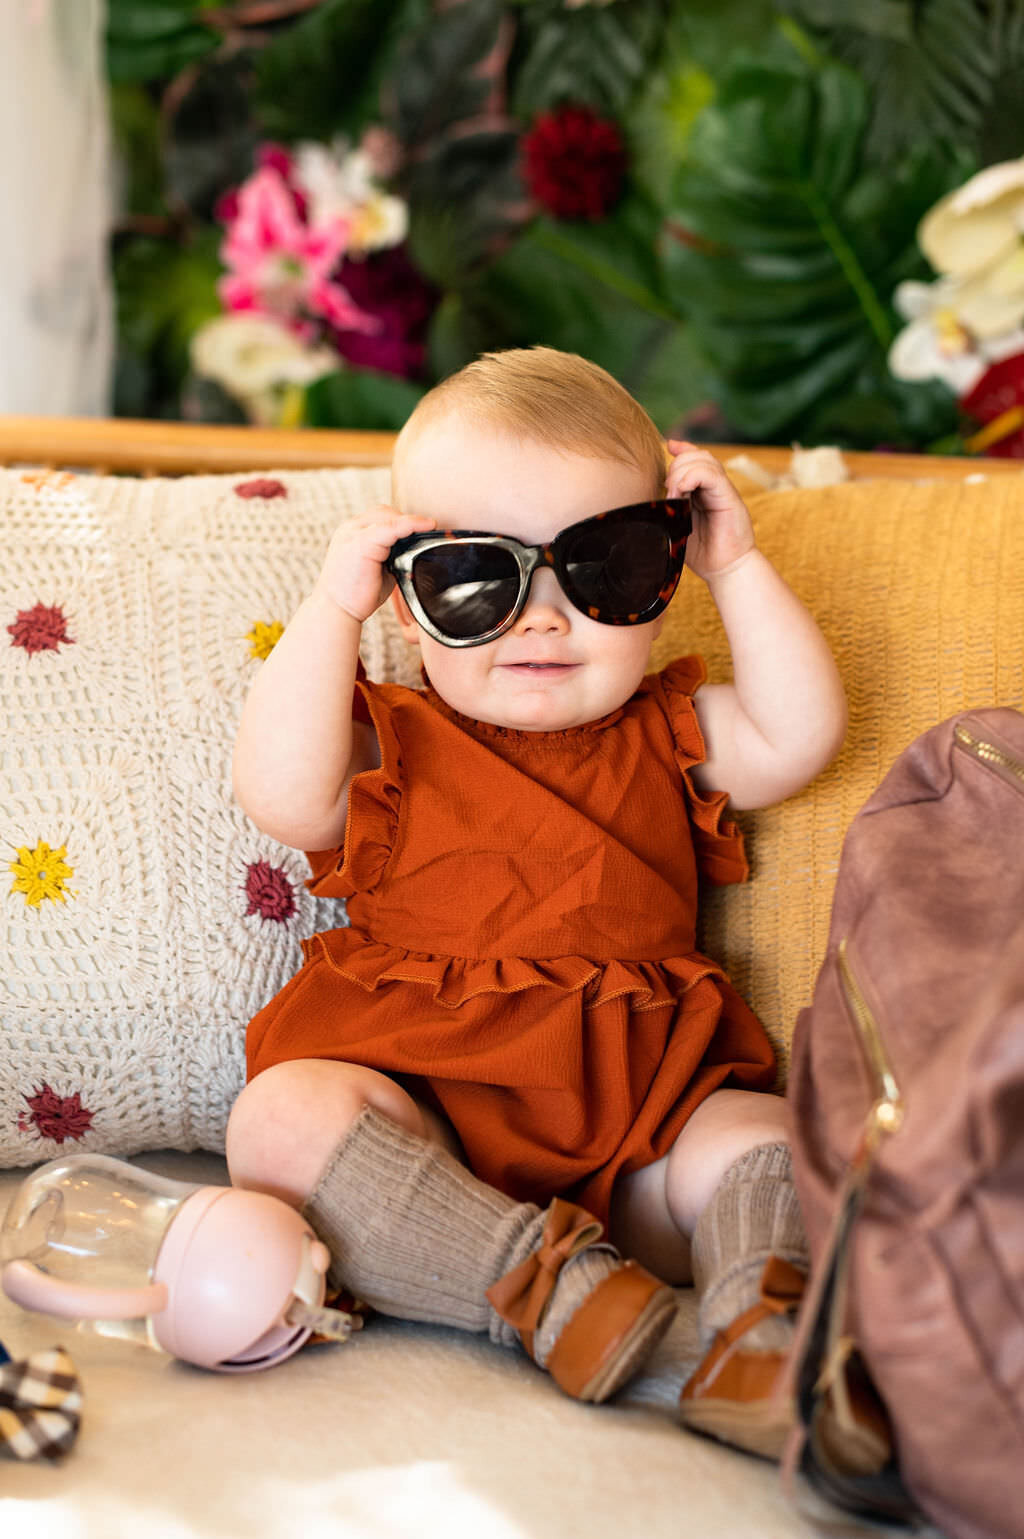 A baby sitting on a couch putting on sunglasses.